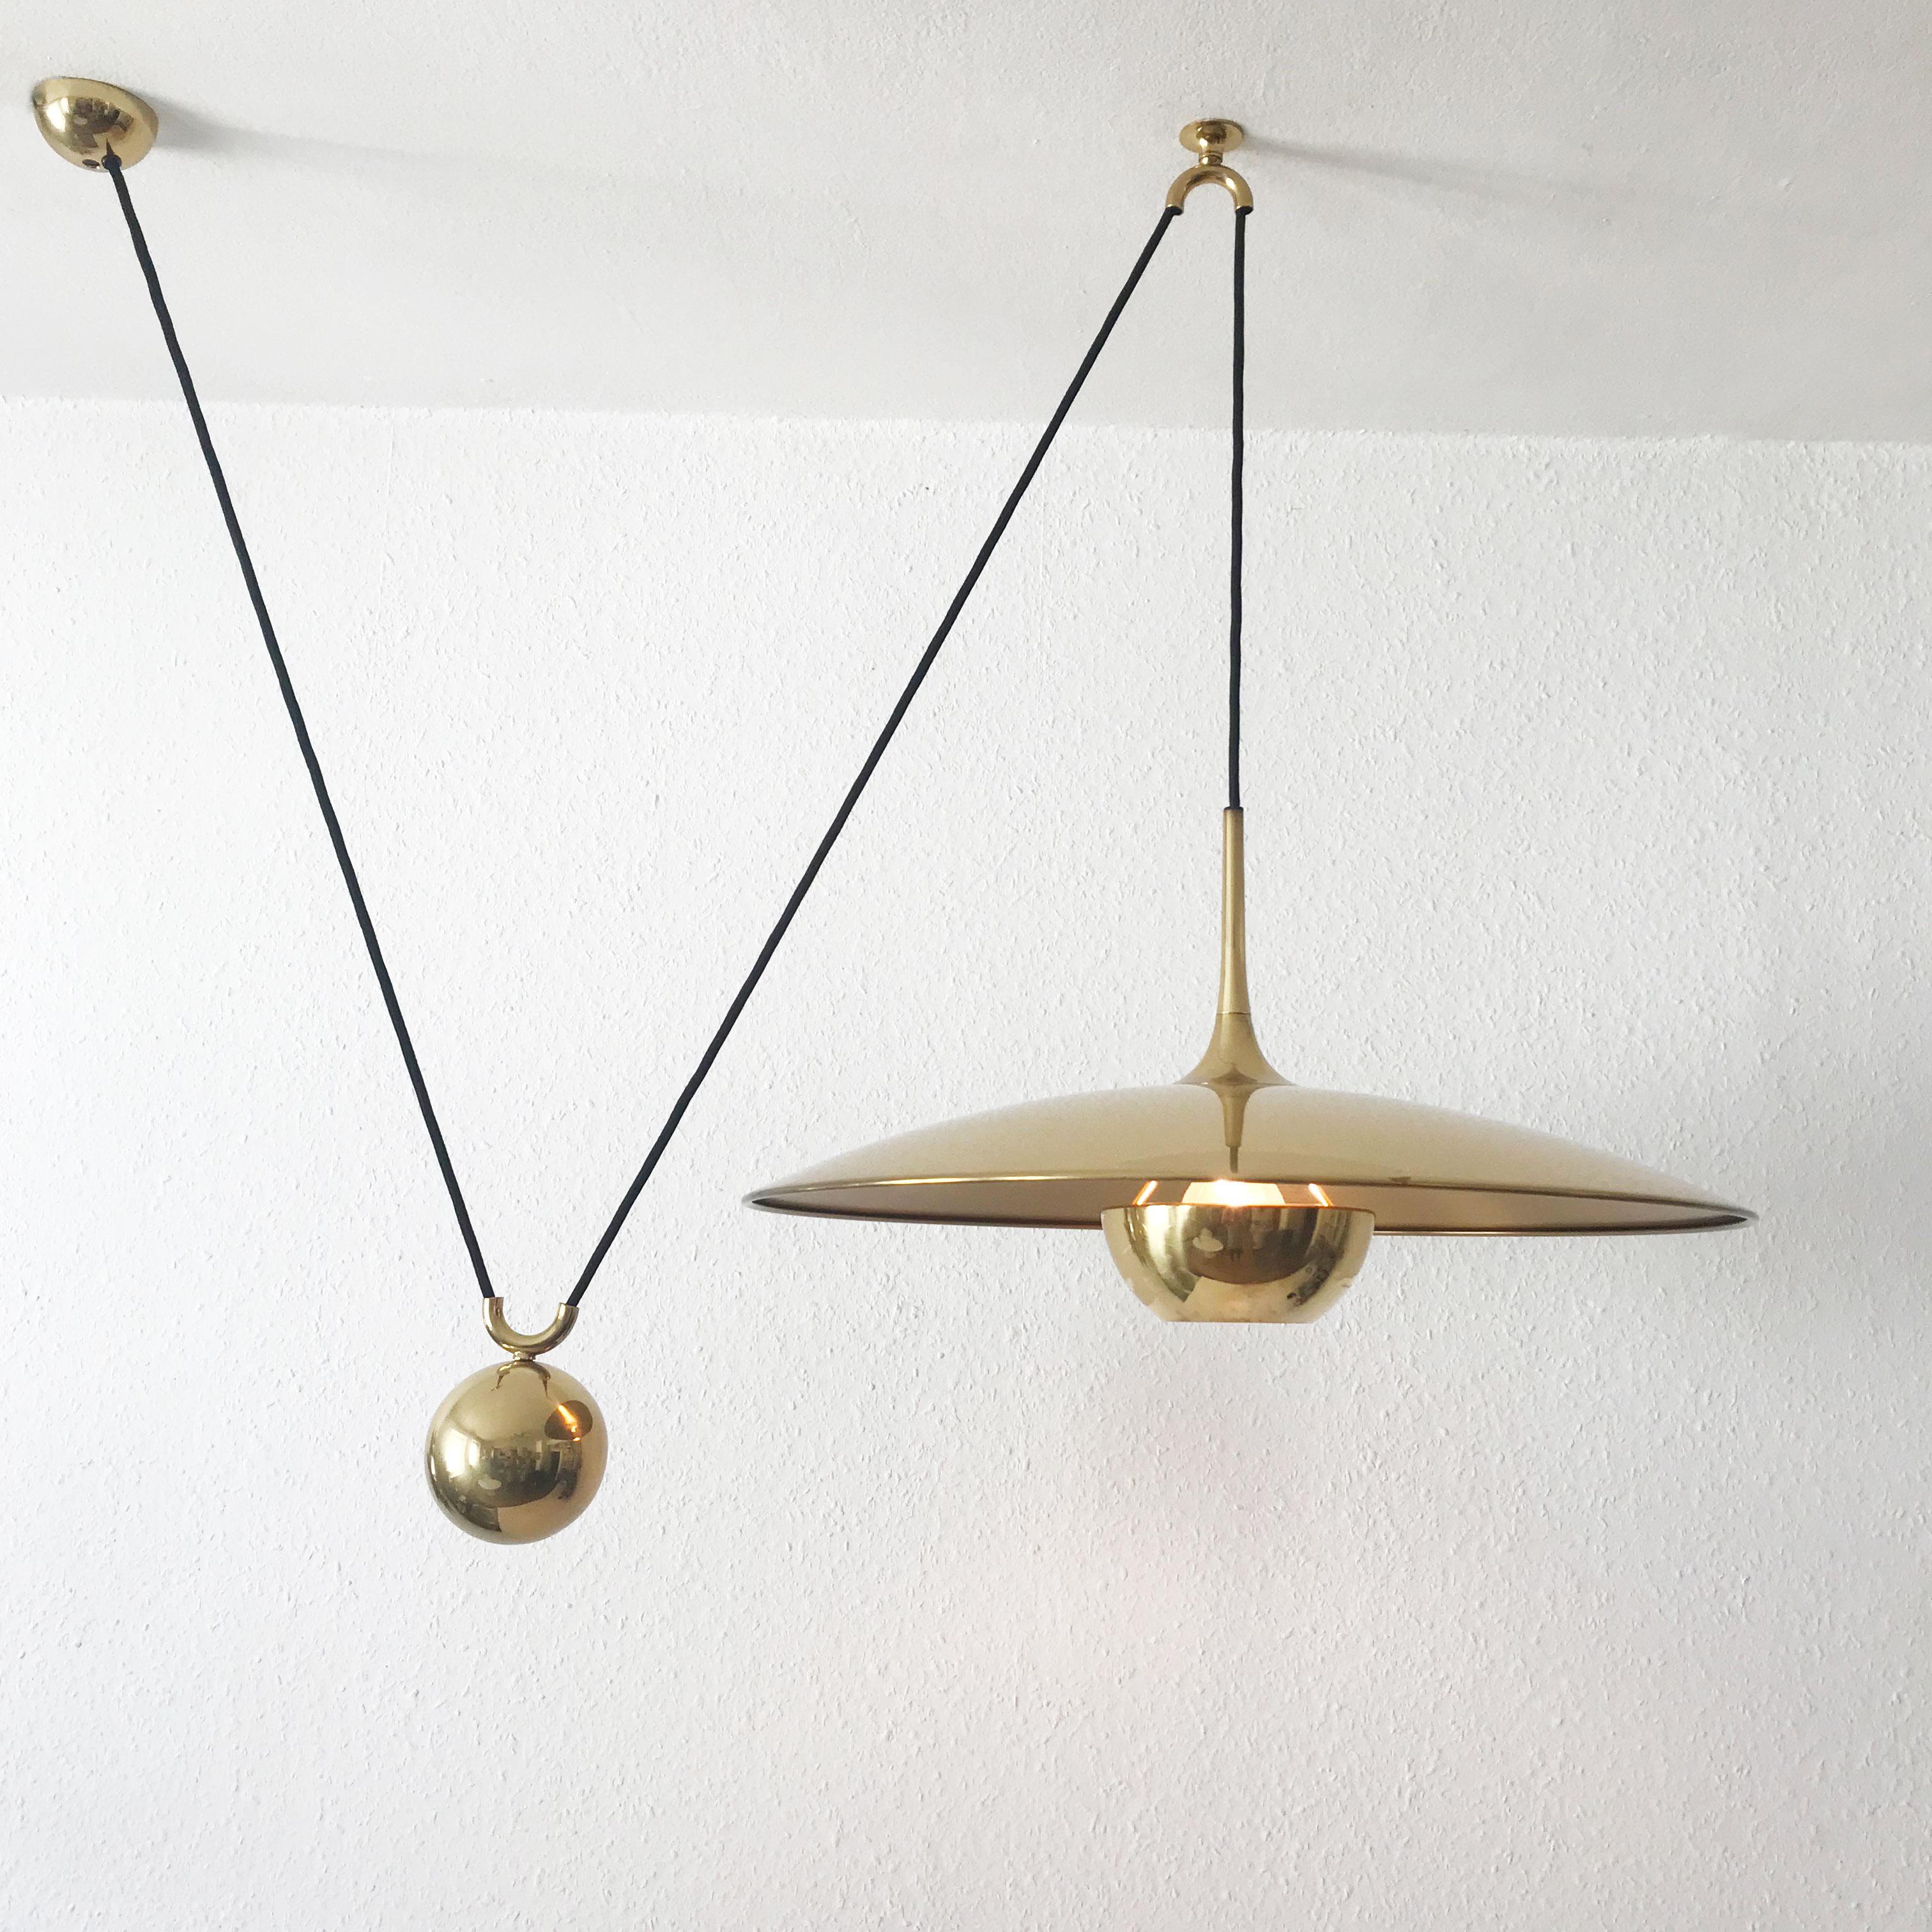 Counter Balance Pendant Lamp Onos 55 by Florian Schulz, 1980s, Germany 6